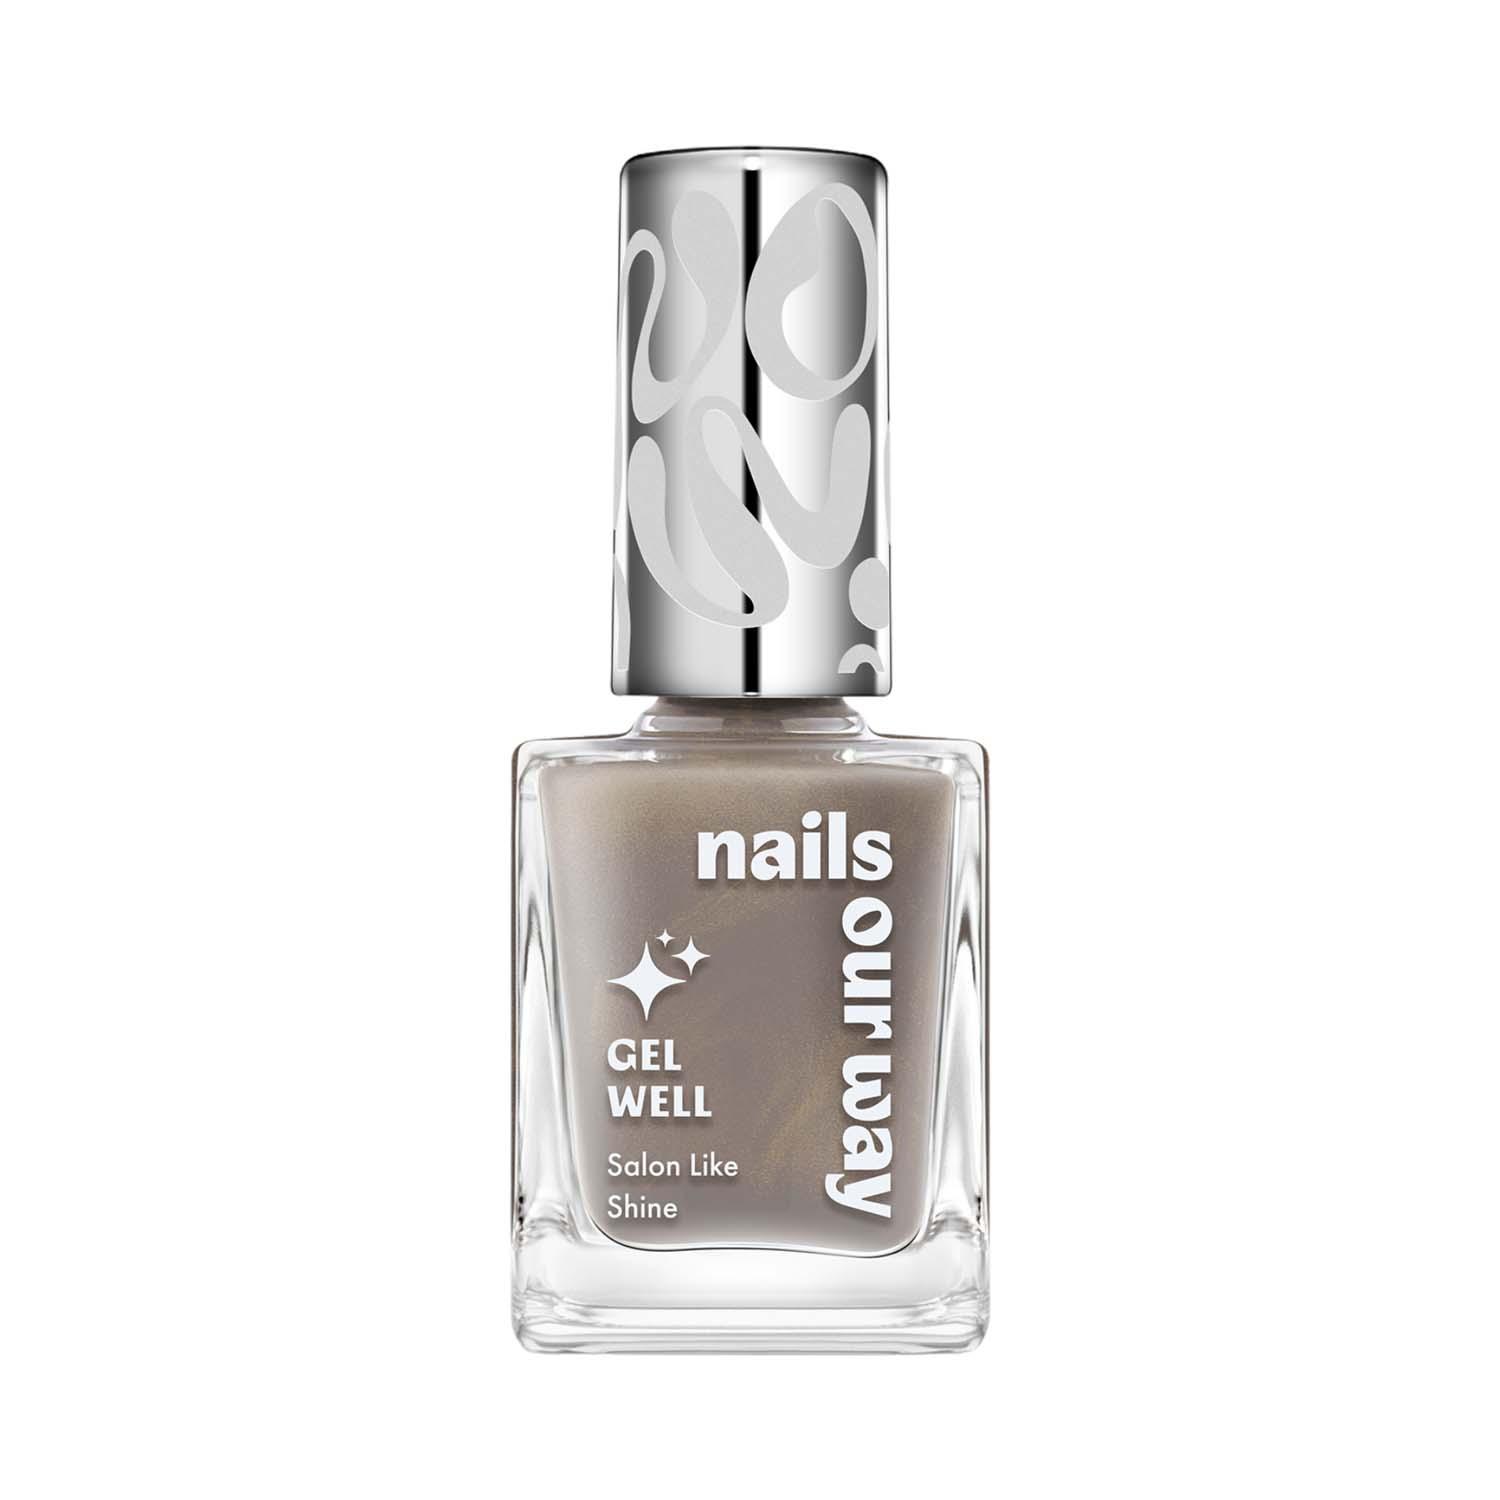 Nails Our Way | Nails Our Way Gel Well Nail Enamel - 703 Edgy (10 ml)